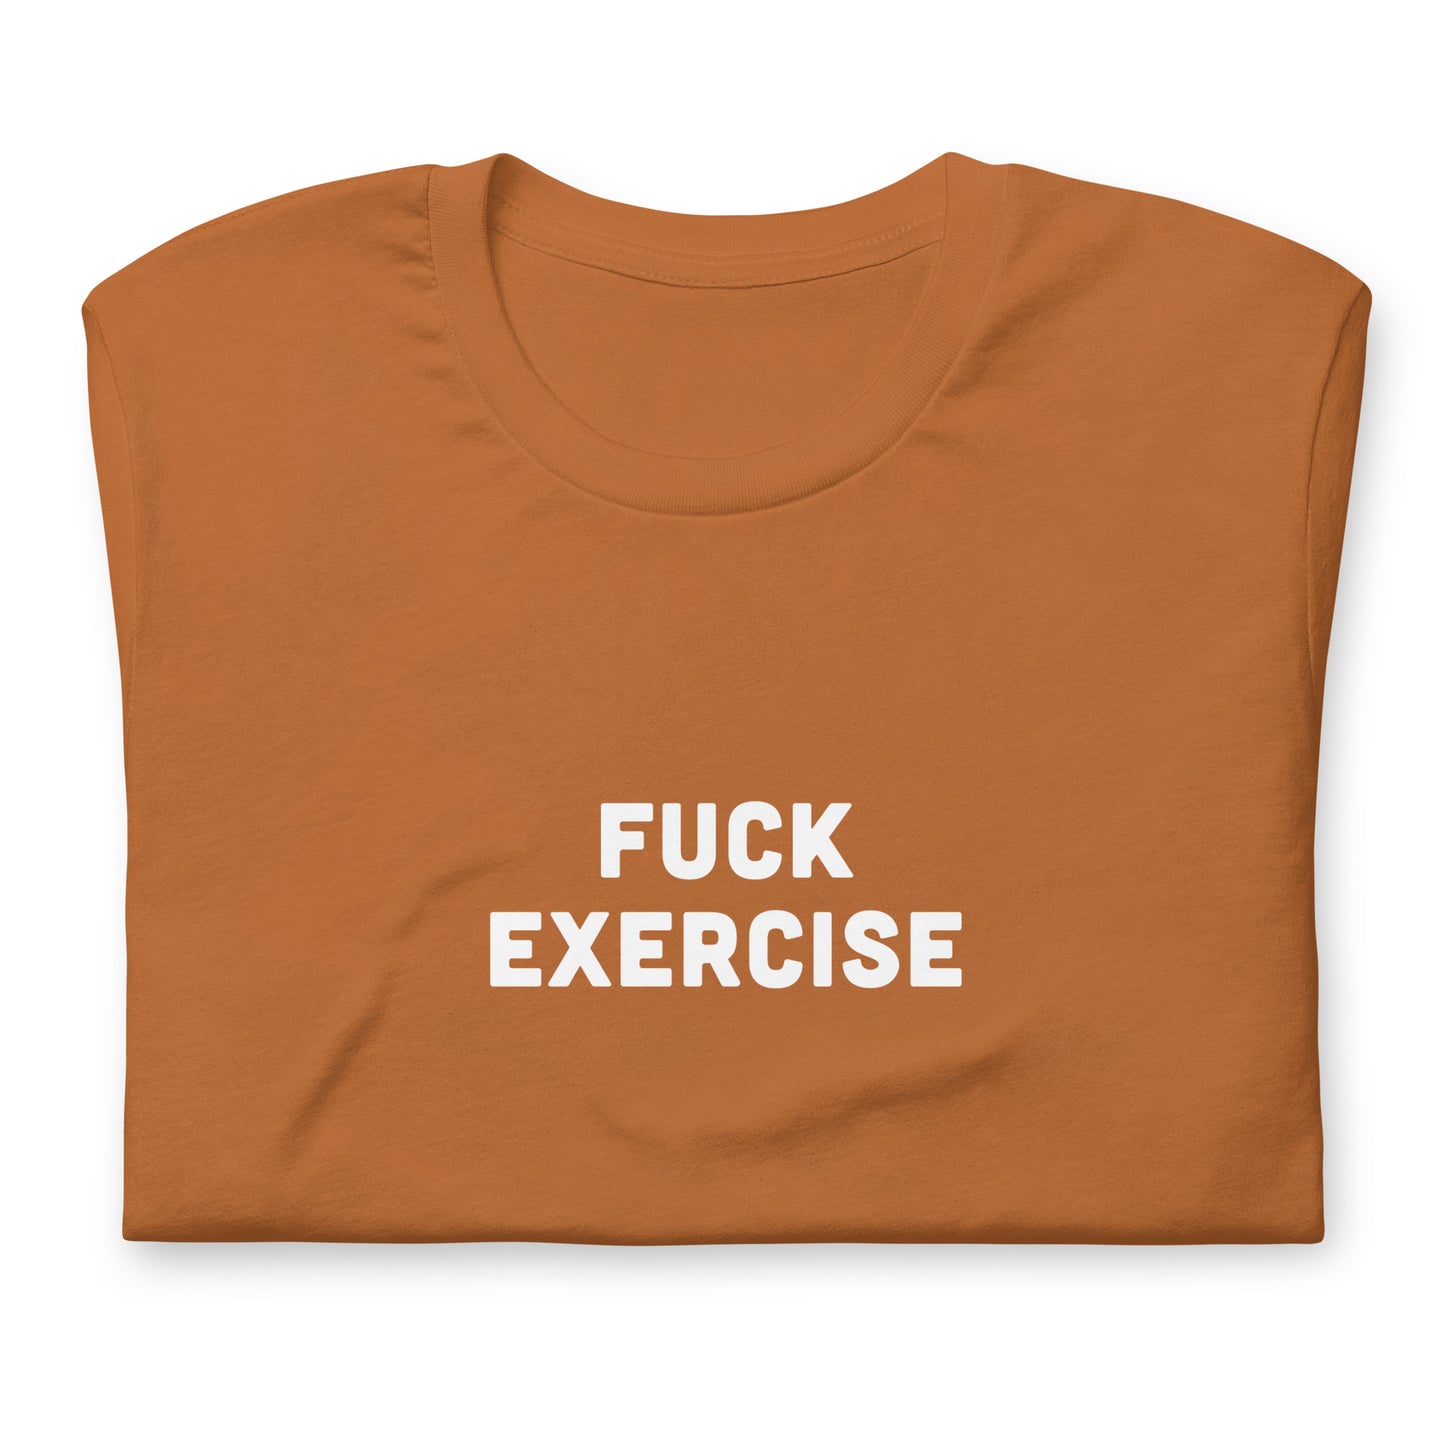 Fuck Exercise T-Shirt Size XL Color Navy